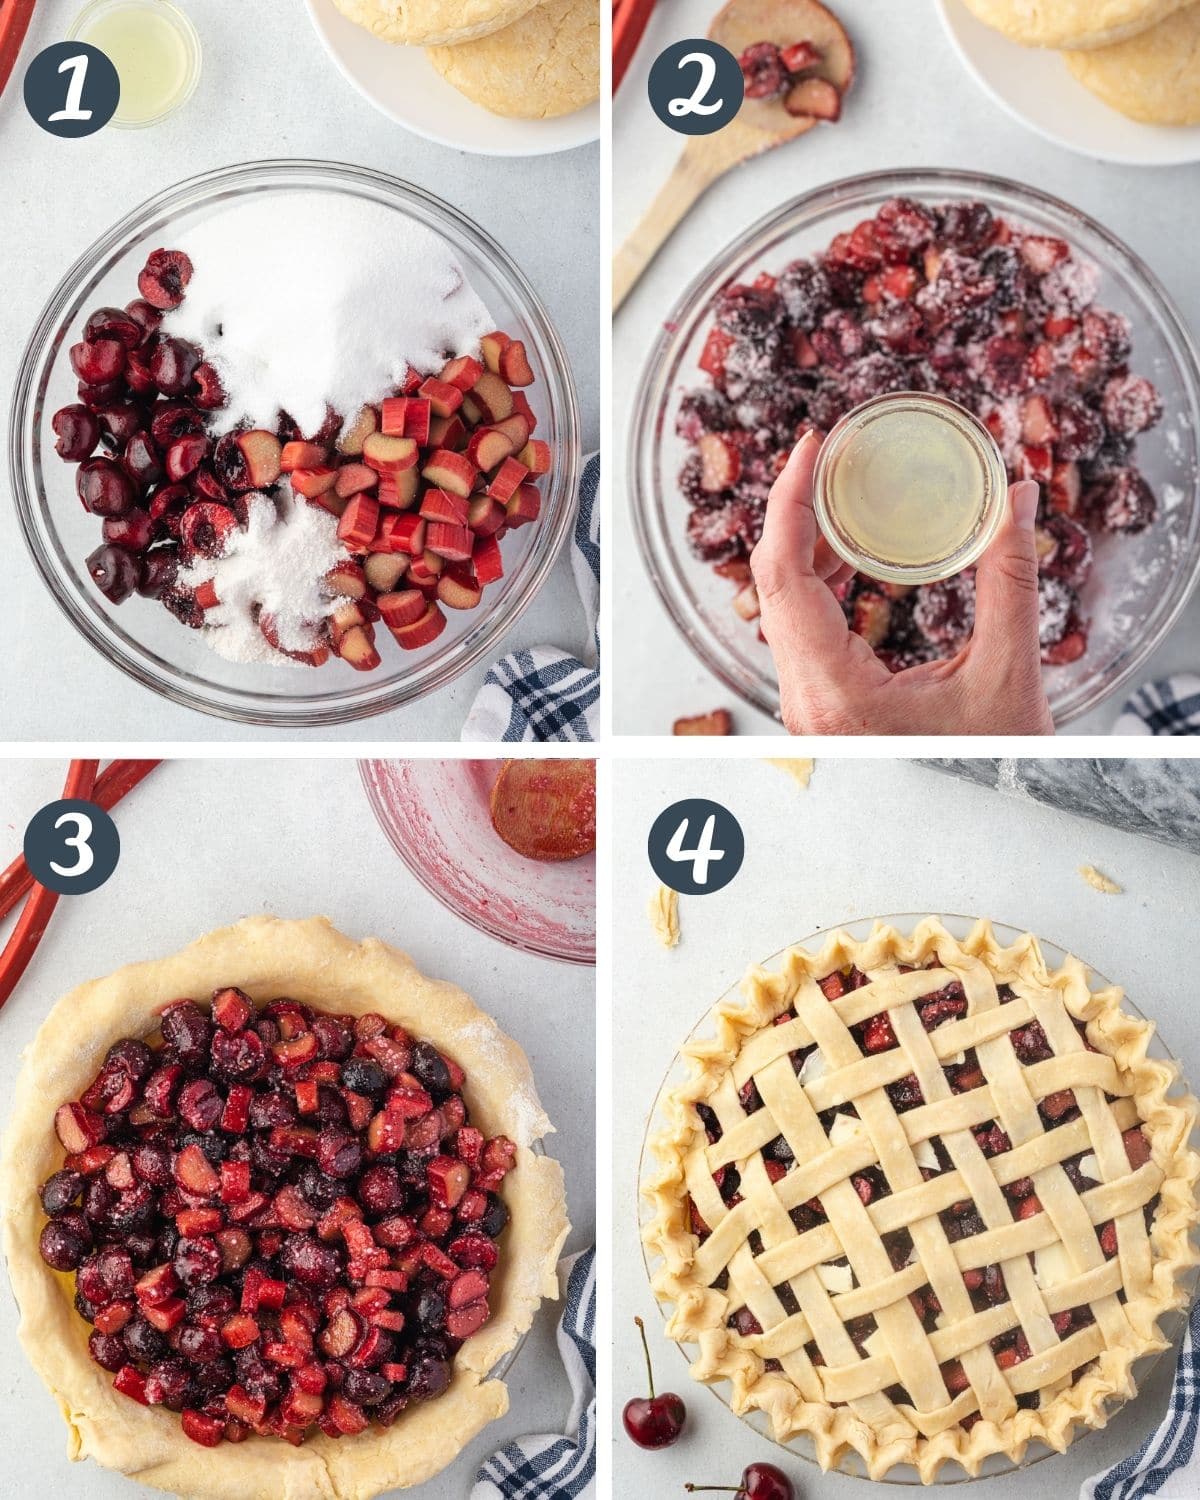 Collage showing 4 steps of making pie (mixing ingredients, add lemon, fill pie, lattice crust).